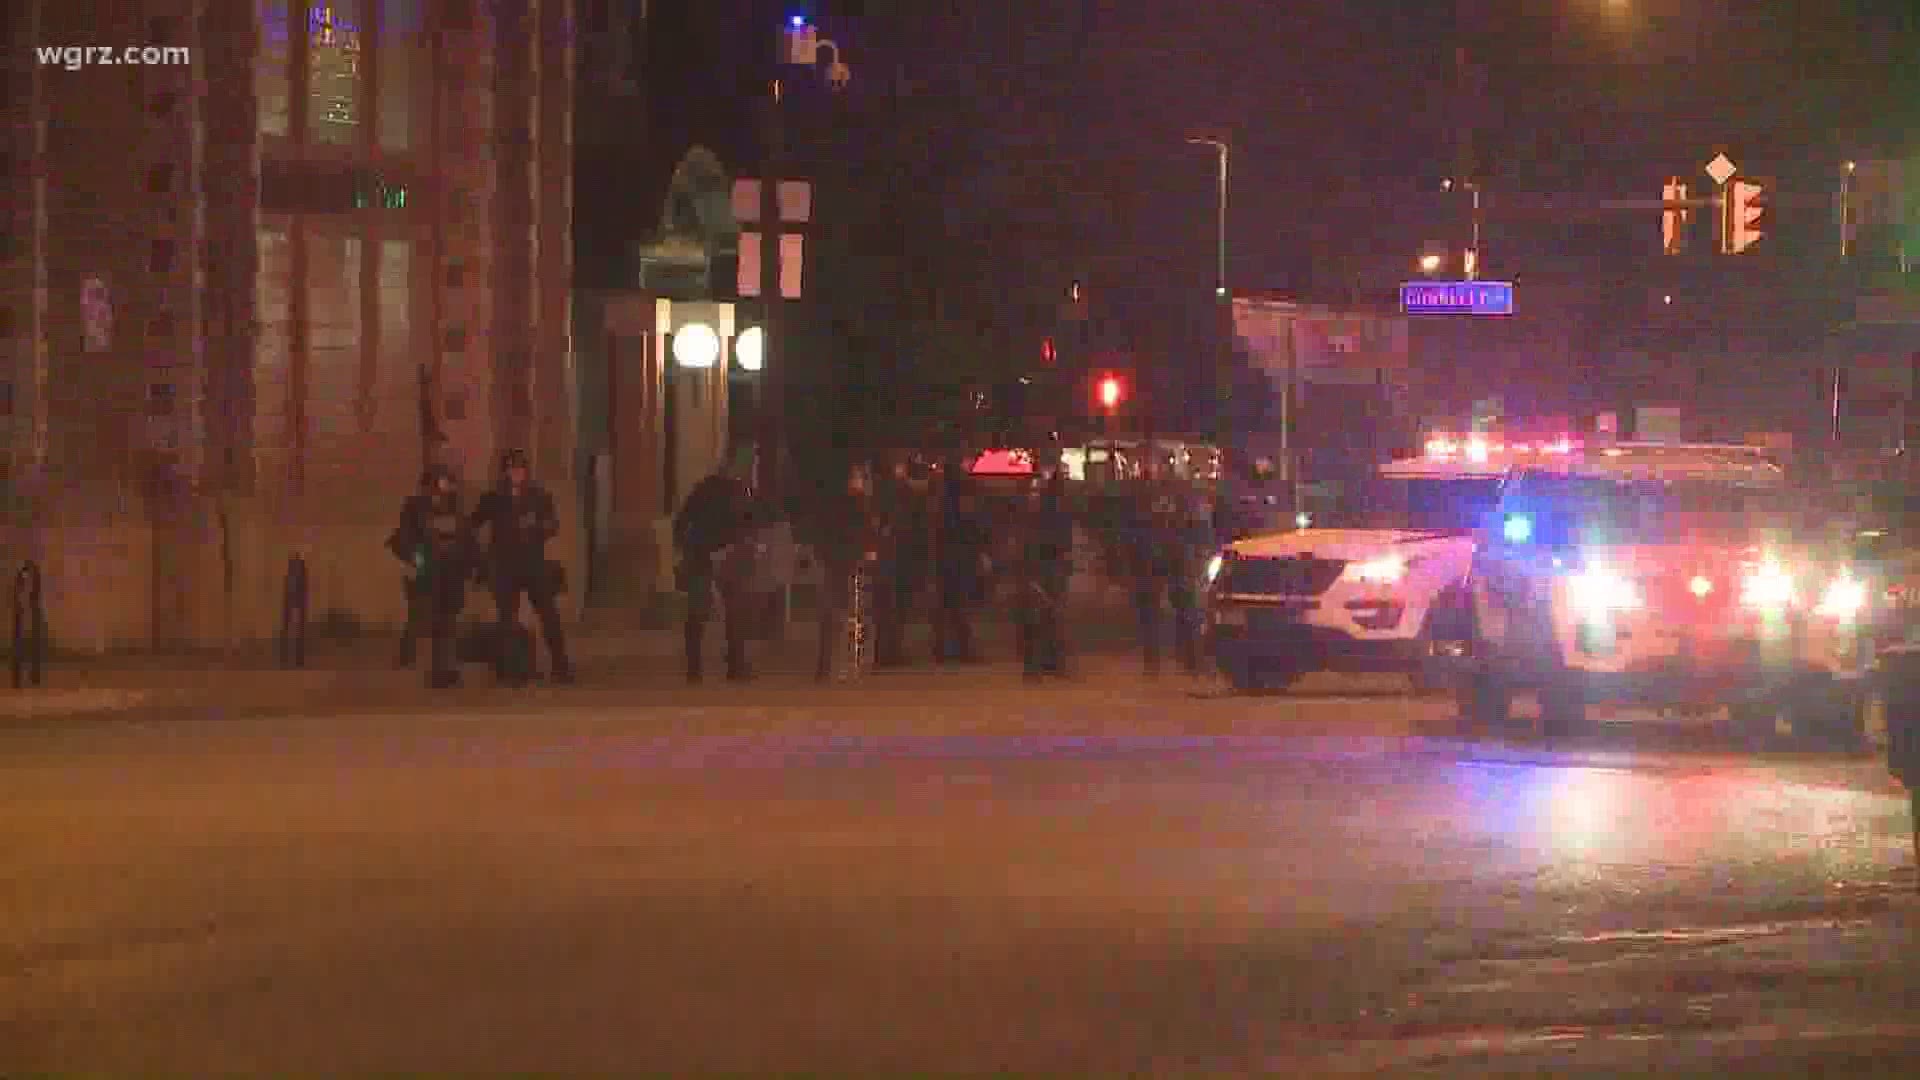 Two officers were hit by a car and seriously hurt during the protests on buffalo's east side.